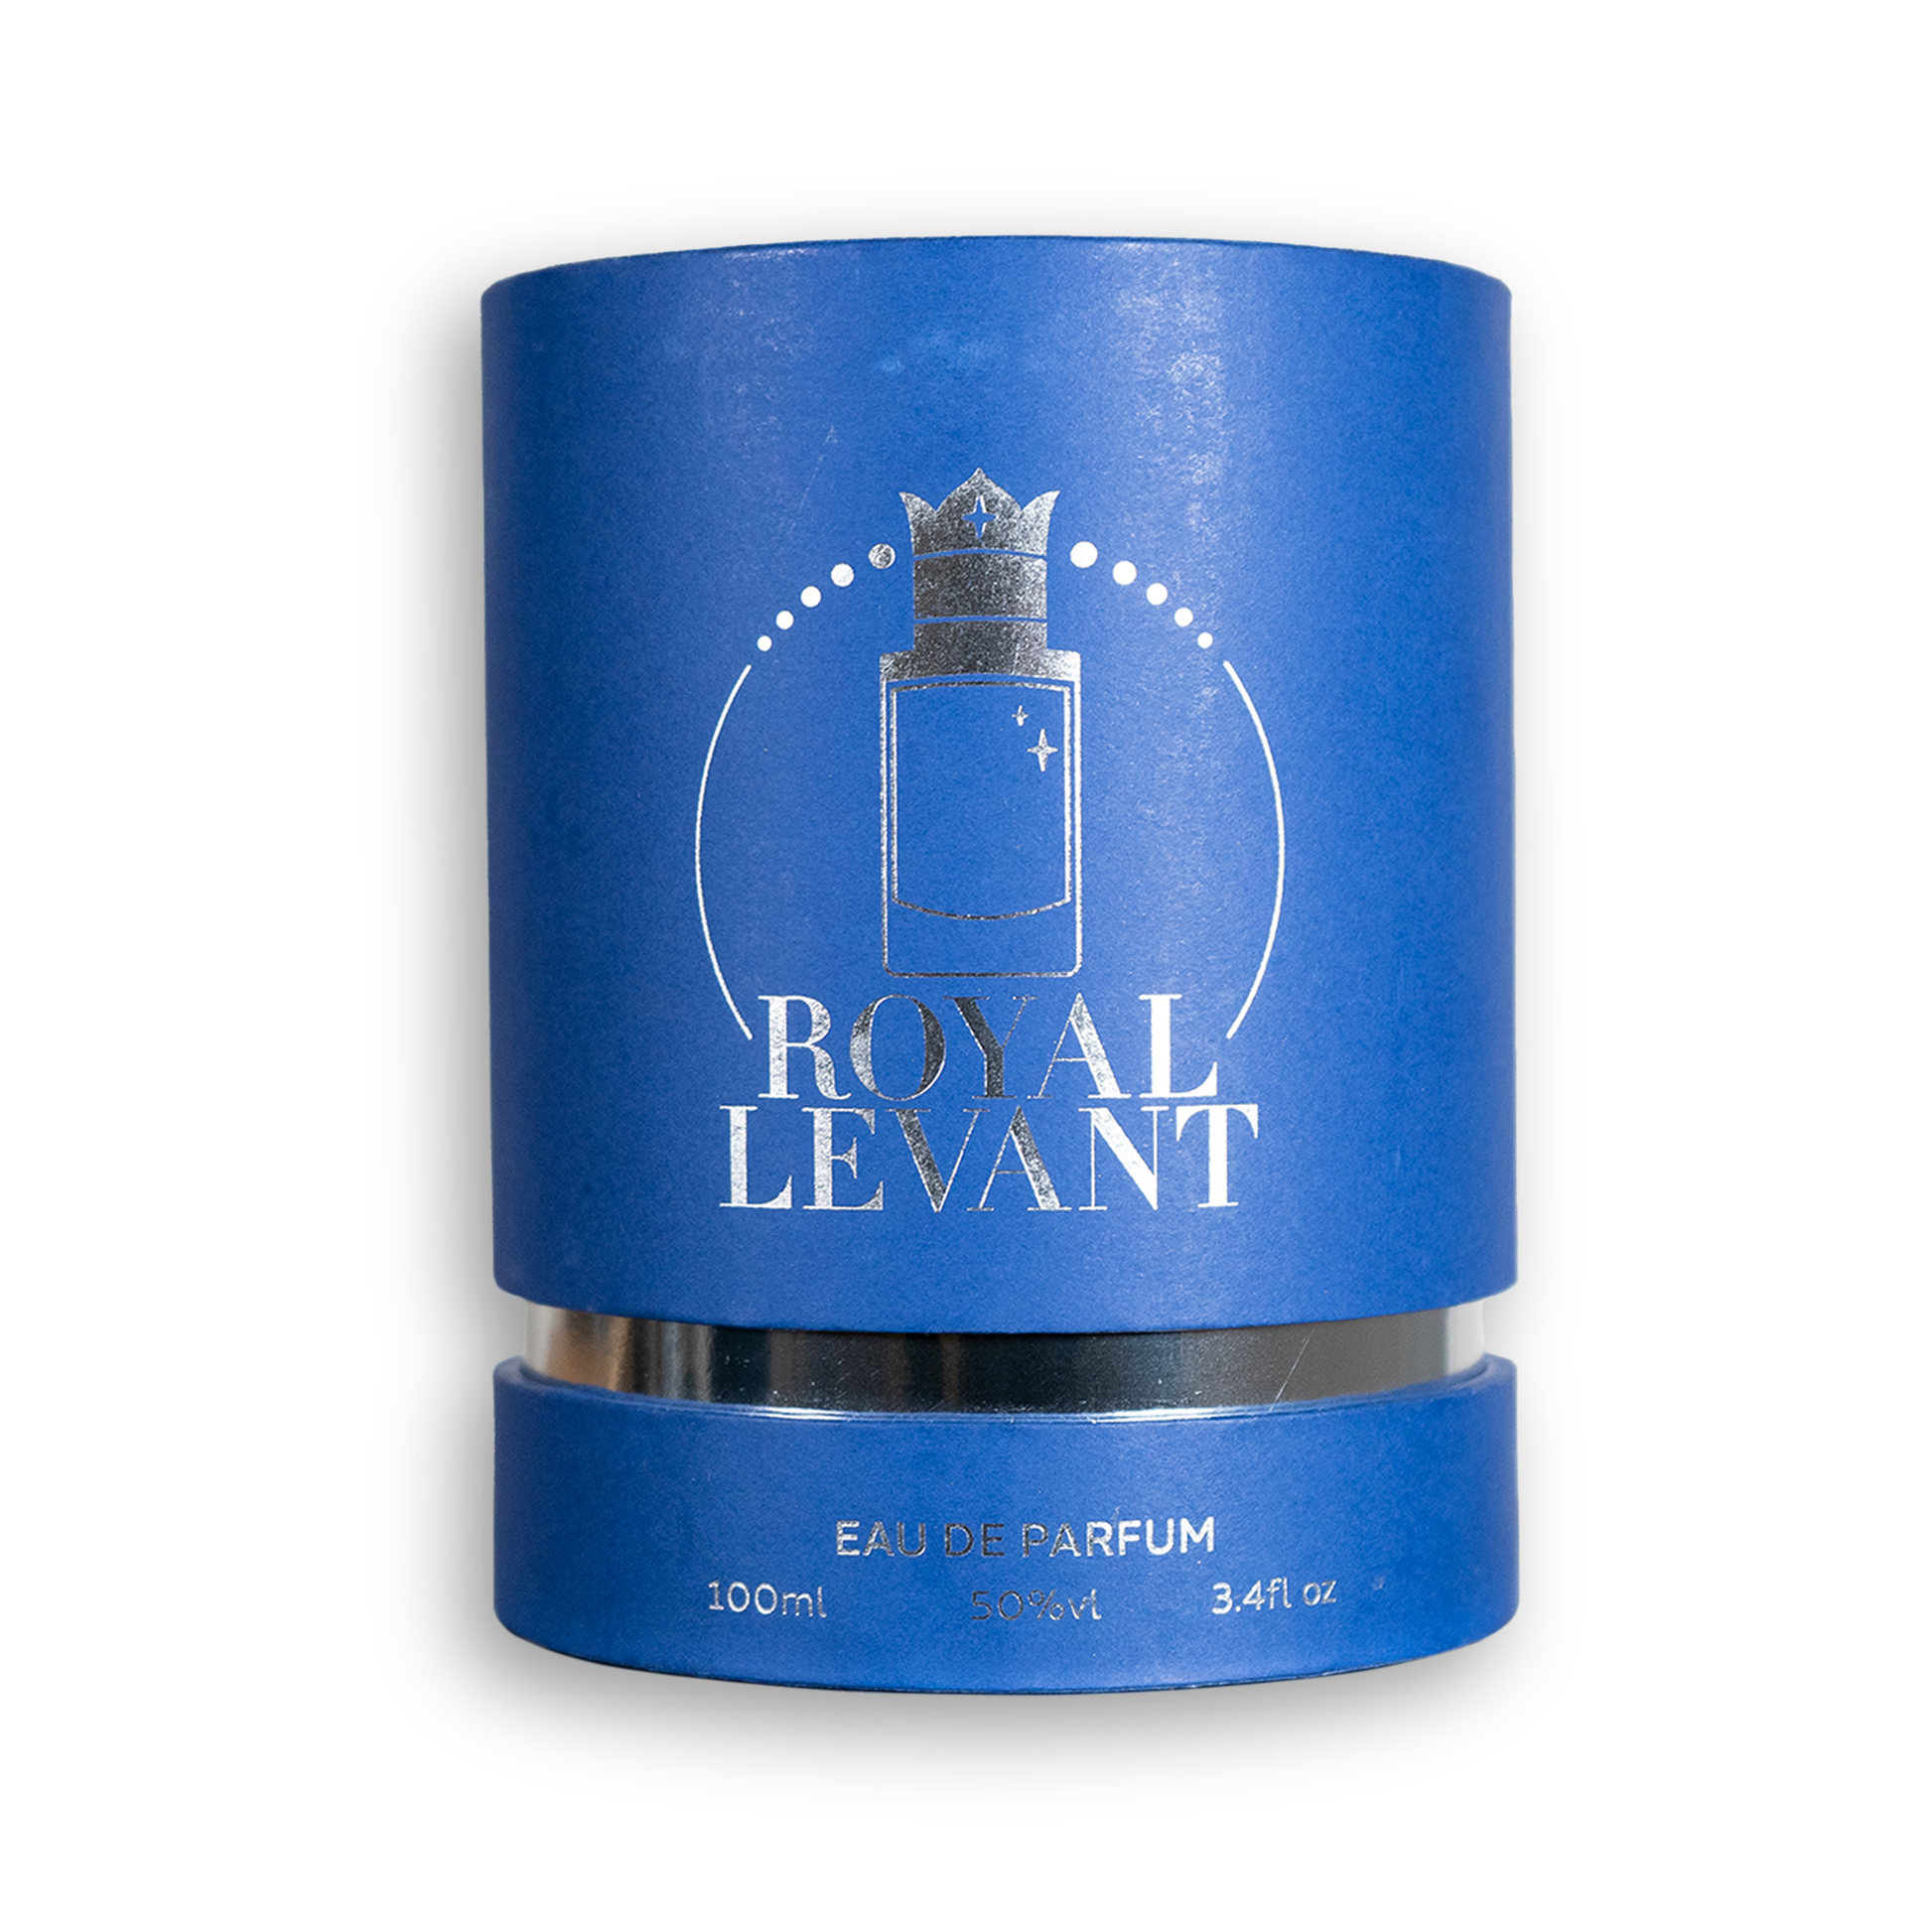 Royal Levant Bottle with Packaging